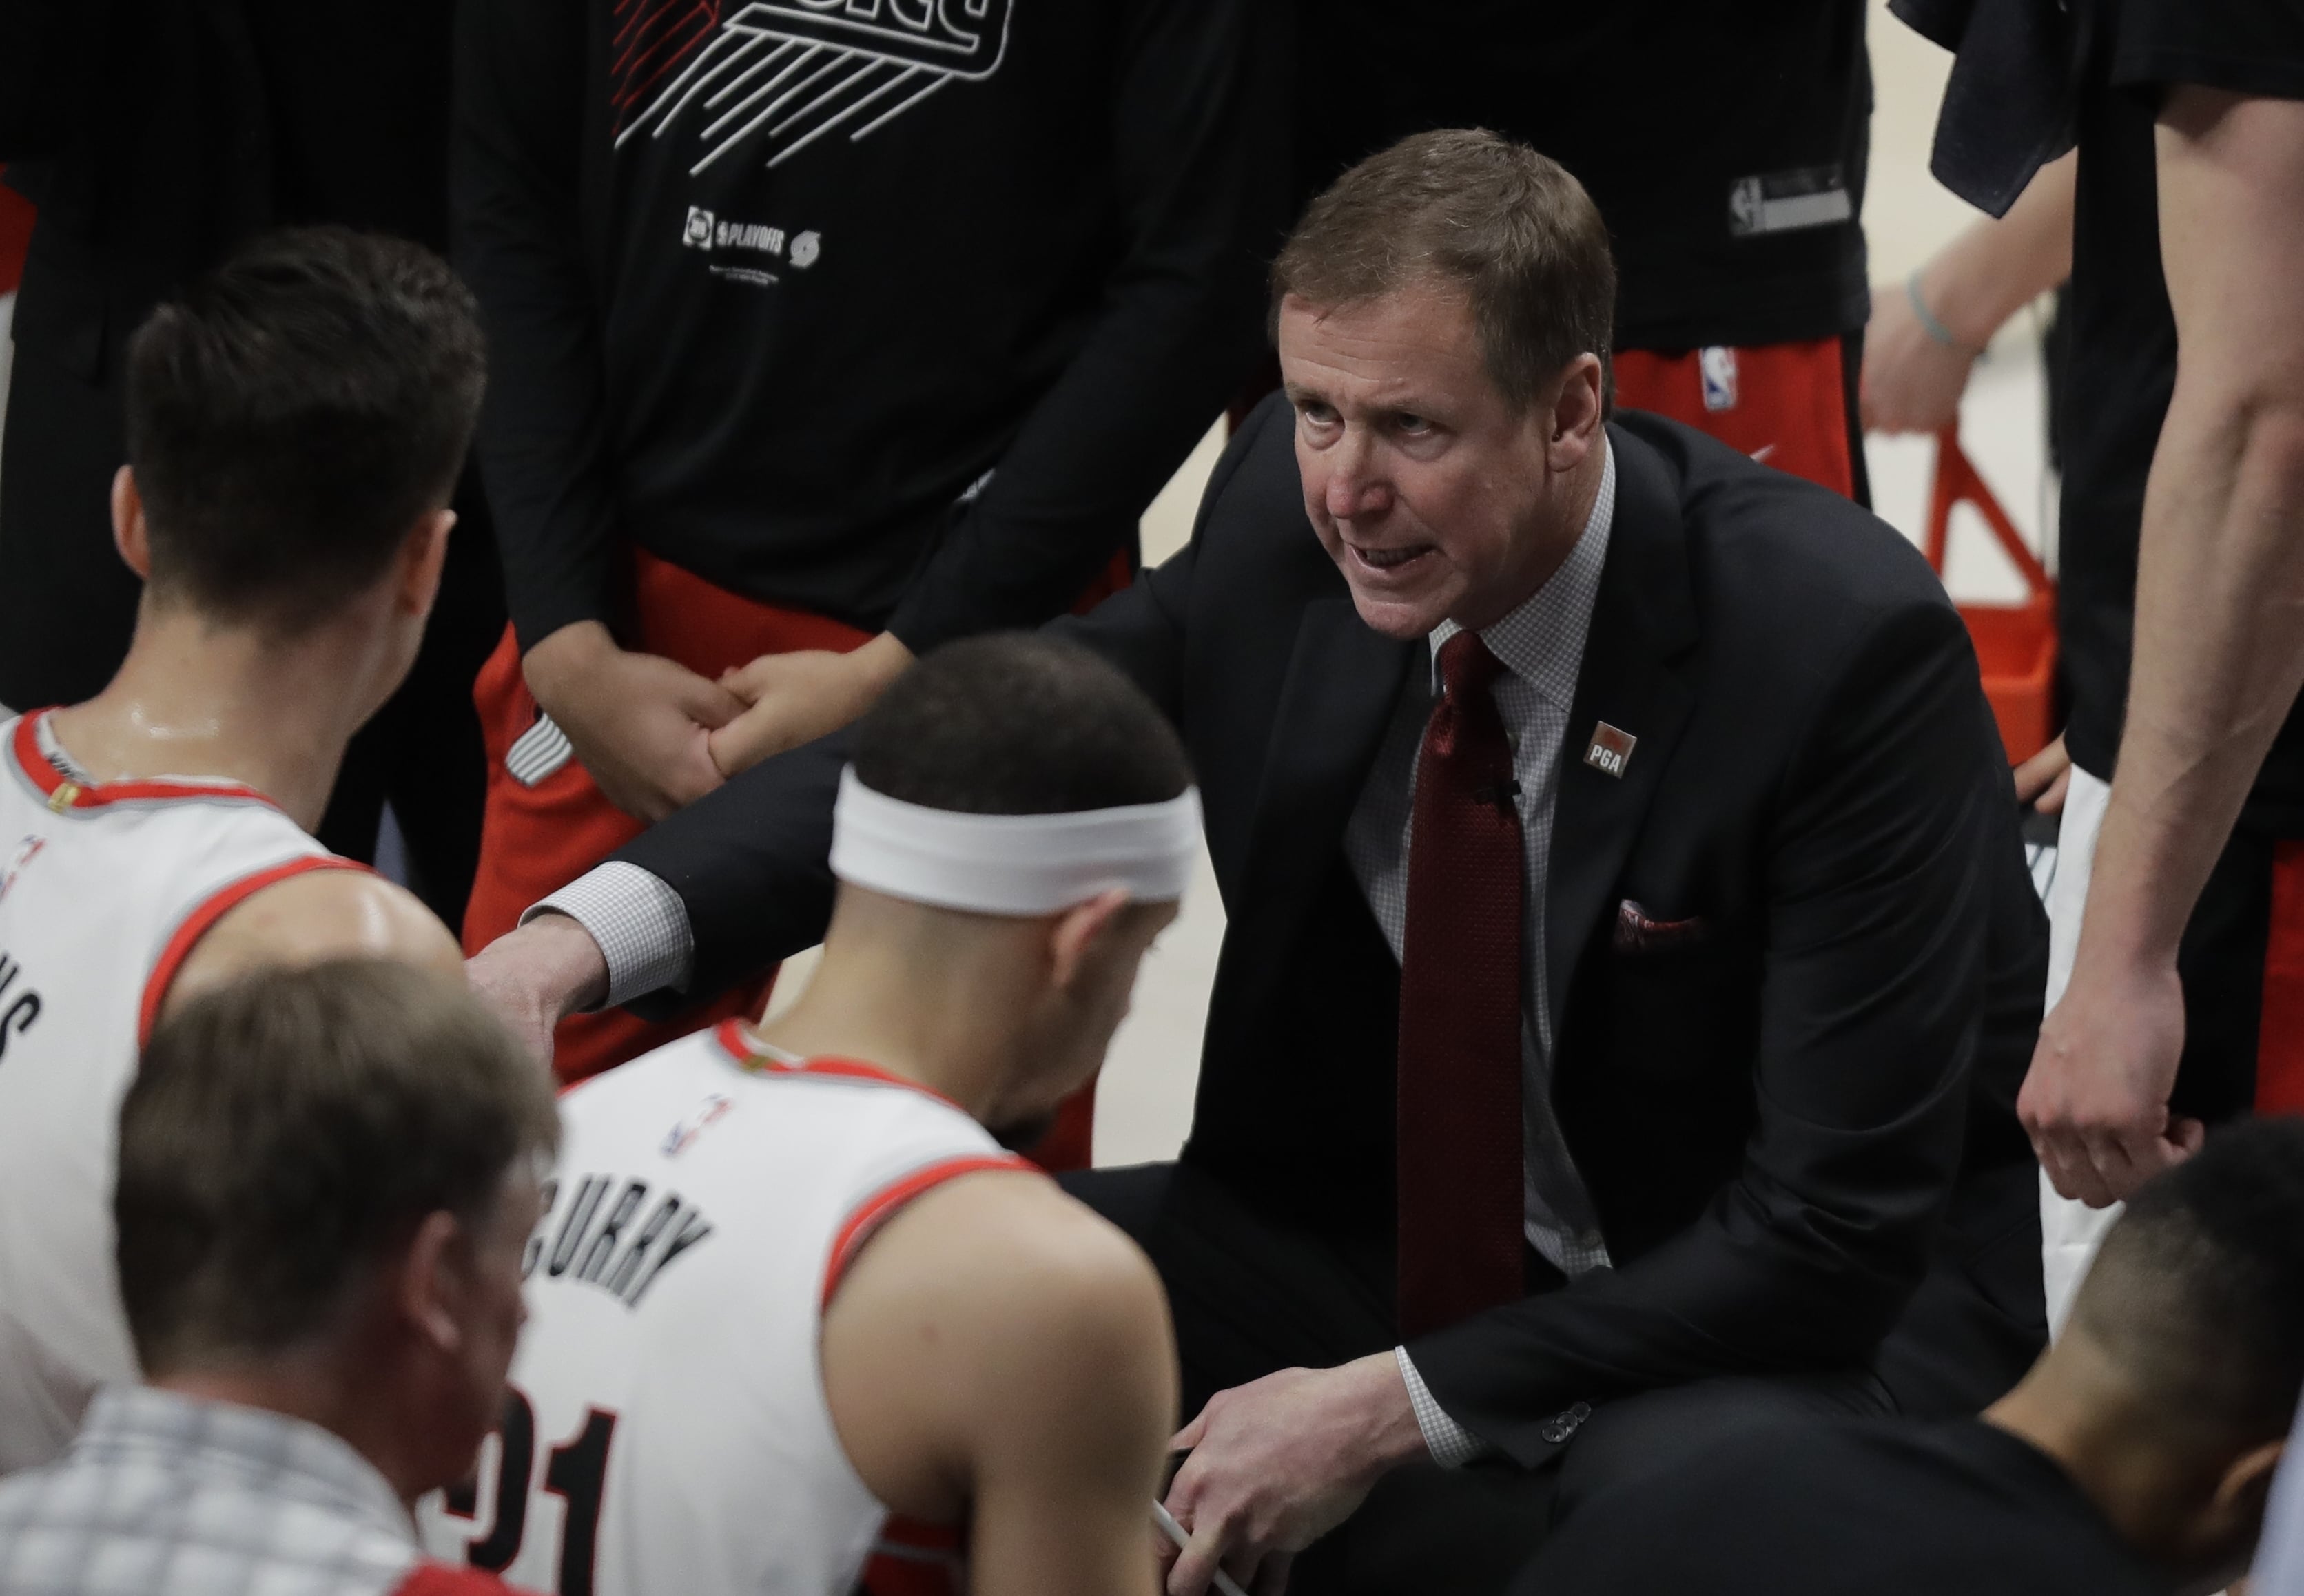 Portland Trail Blazers head coach Terry Stotts talks to his team during a time out in the second half of Game 3 of the NBA basketball playoffs Western Conference finals against the Golden State Warriors, Saturday, May 18, 2019, in Portland, Ore. The Warriors won 110-99. (AP Photo/Ted S.